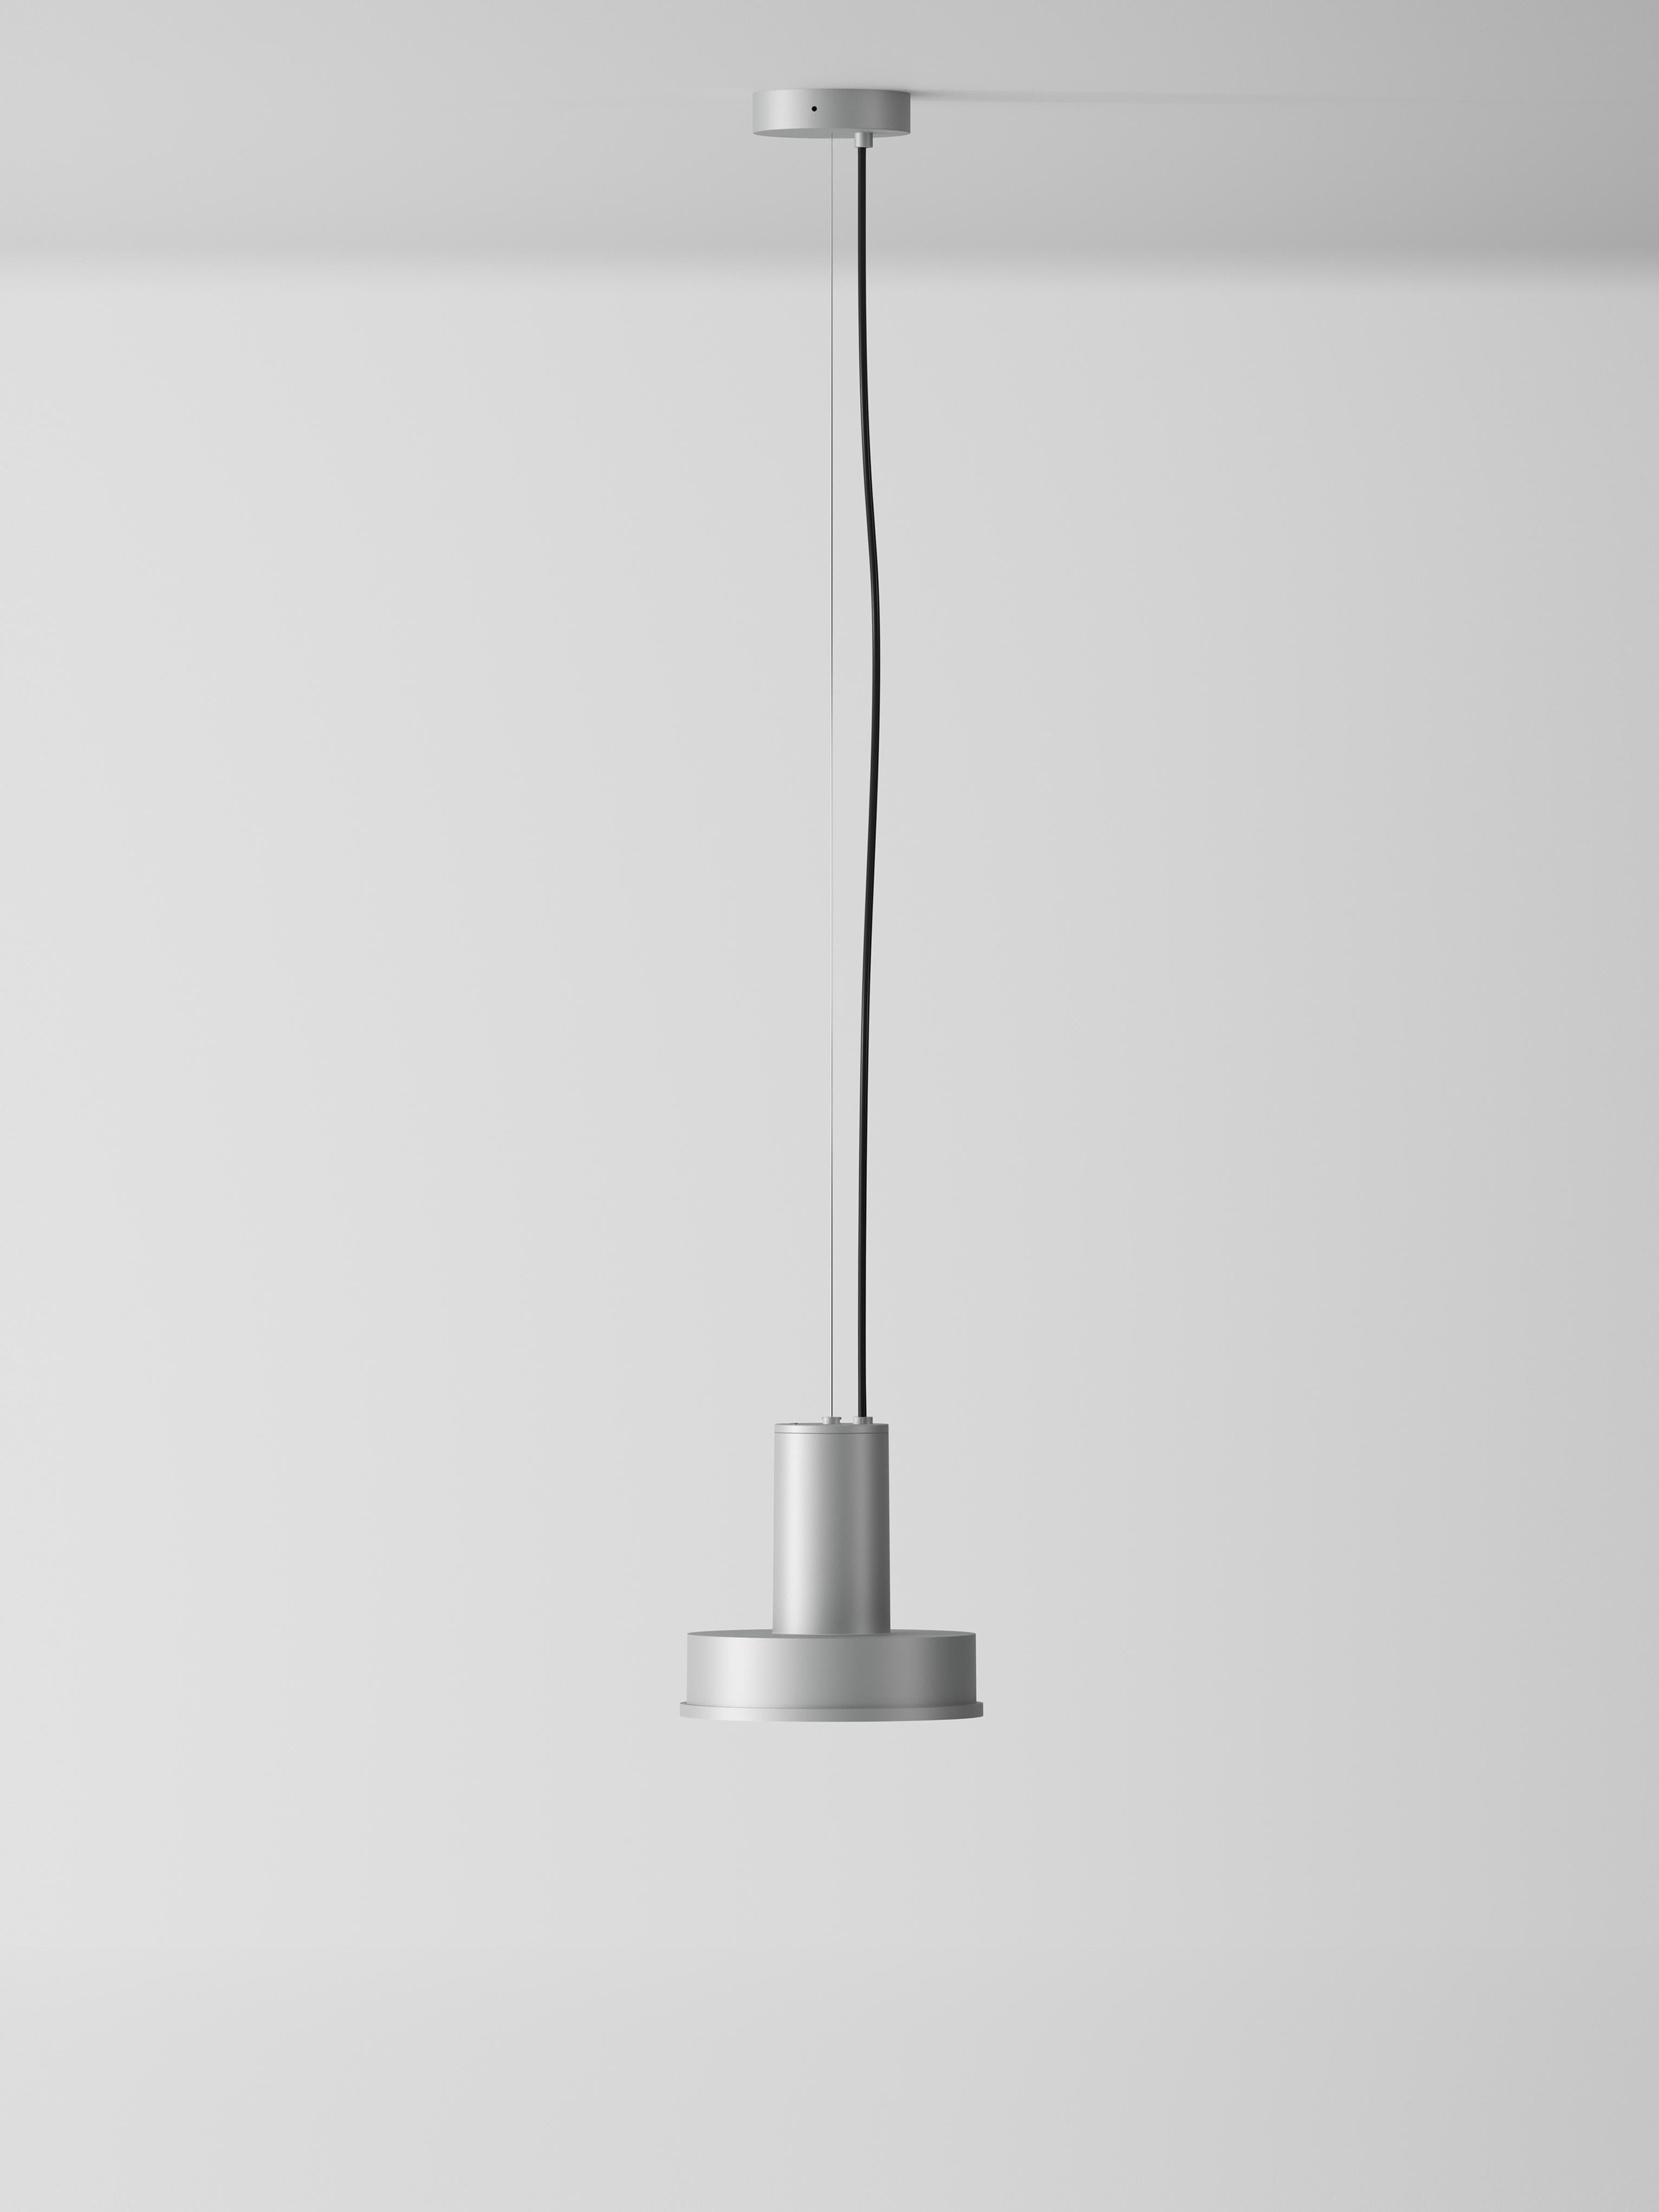 Aluminum Arne S Domus pendant lamp by Santa & Cole
Dimensions: D 23 x H 440 cm.
Materials: metal, aluminum.
Available in other colors.

Its aluminium body houses the very best LED technology with a single COB emitter, shielded from view by a